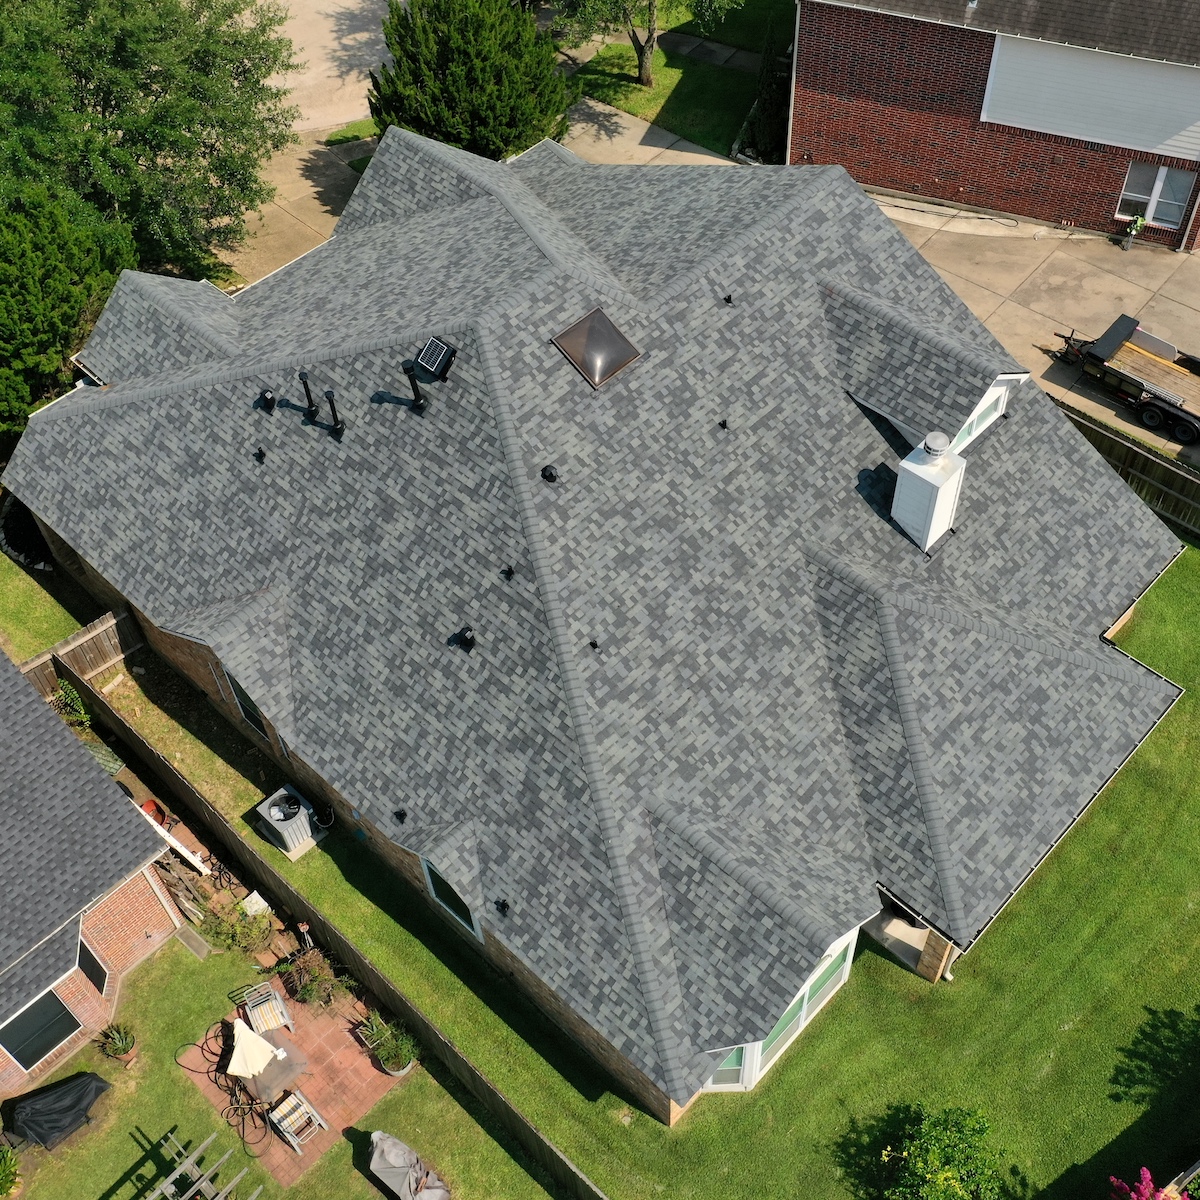 Piney Point Village Roof Replacement vs. Repair: What's Right for Your Home?